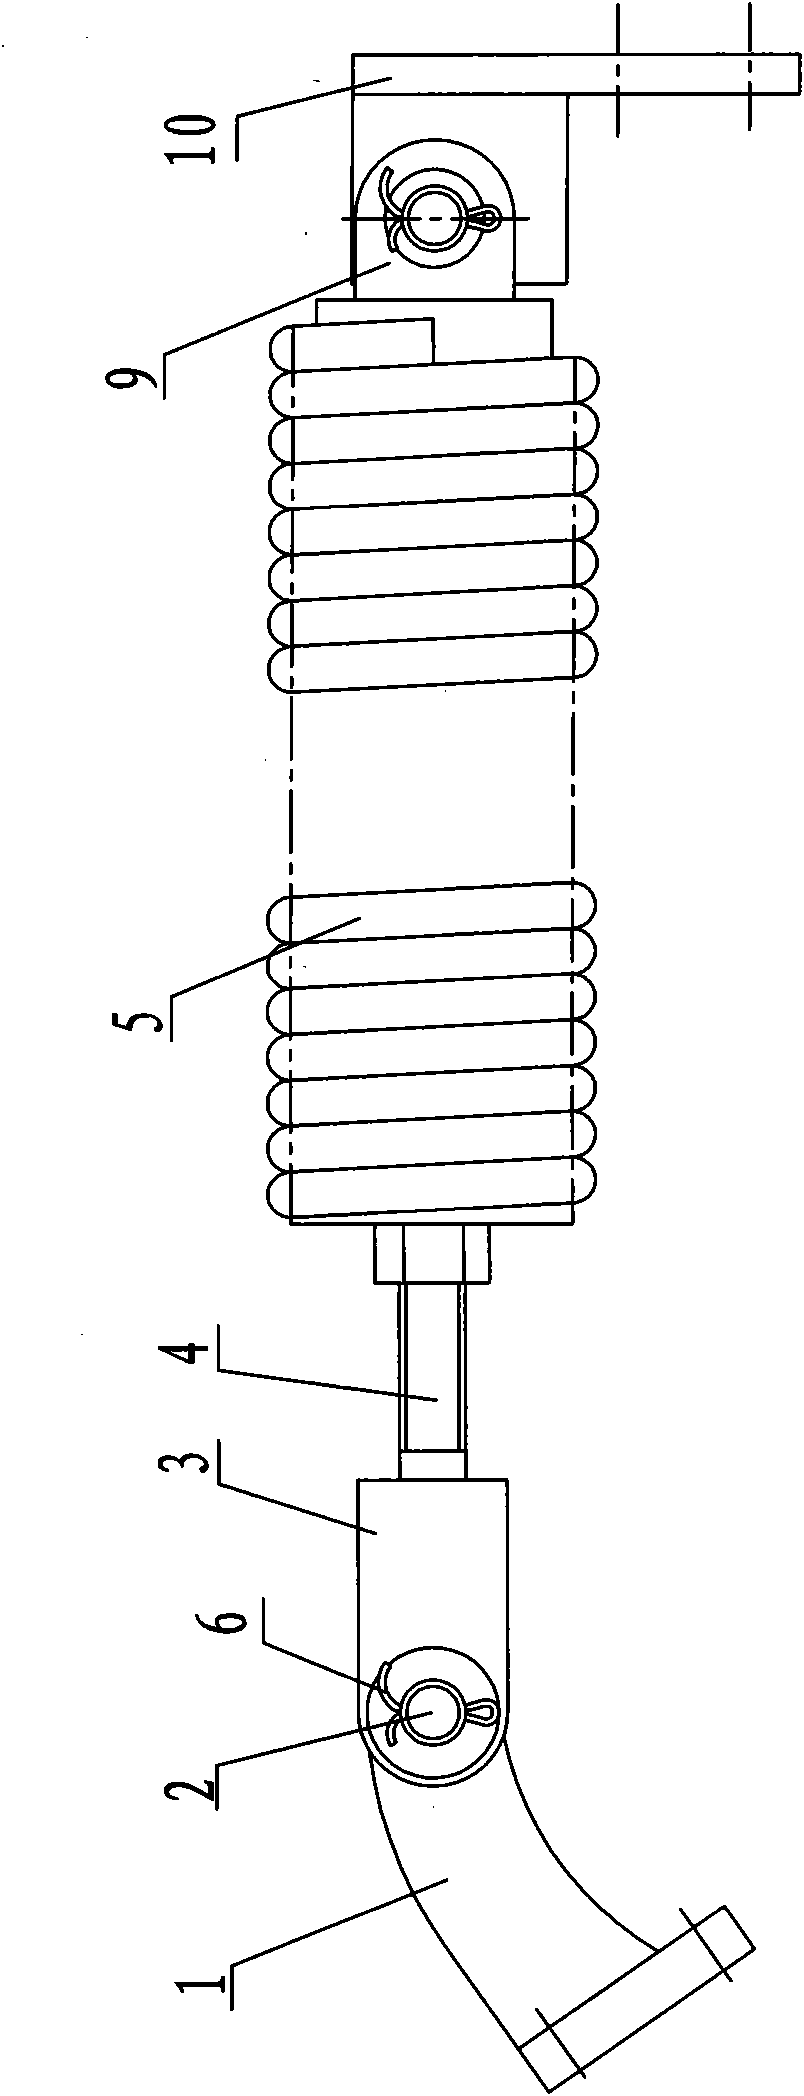 Connection structure of tension spring type balance spring of double-arm folding type high-voltage alternating current isolating switch